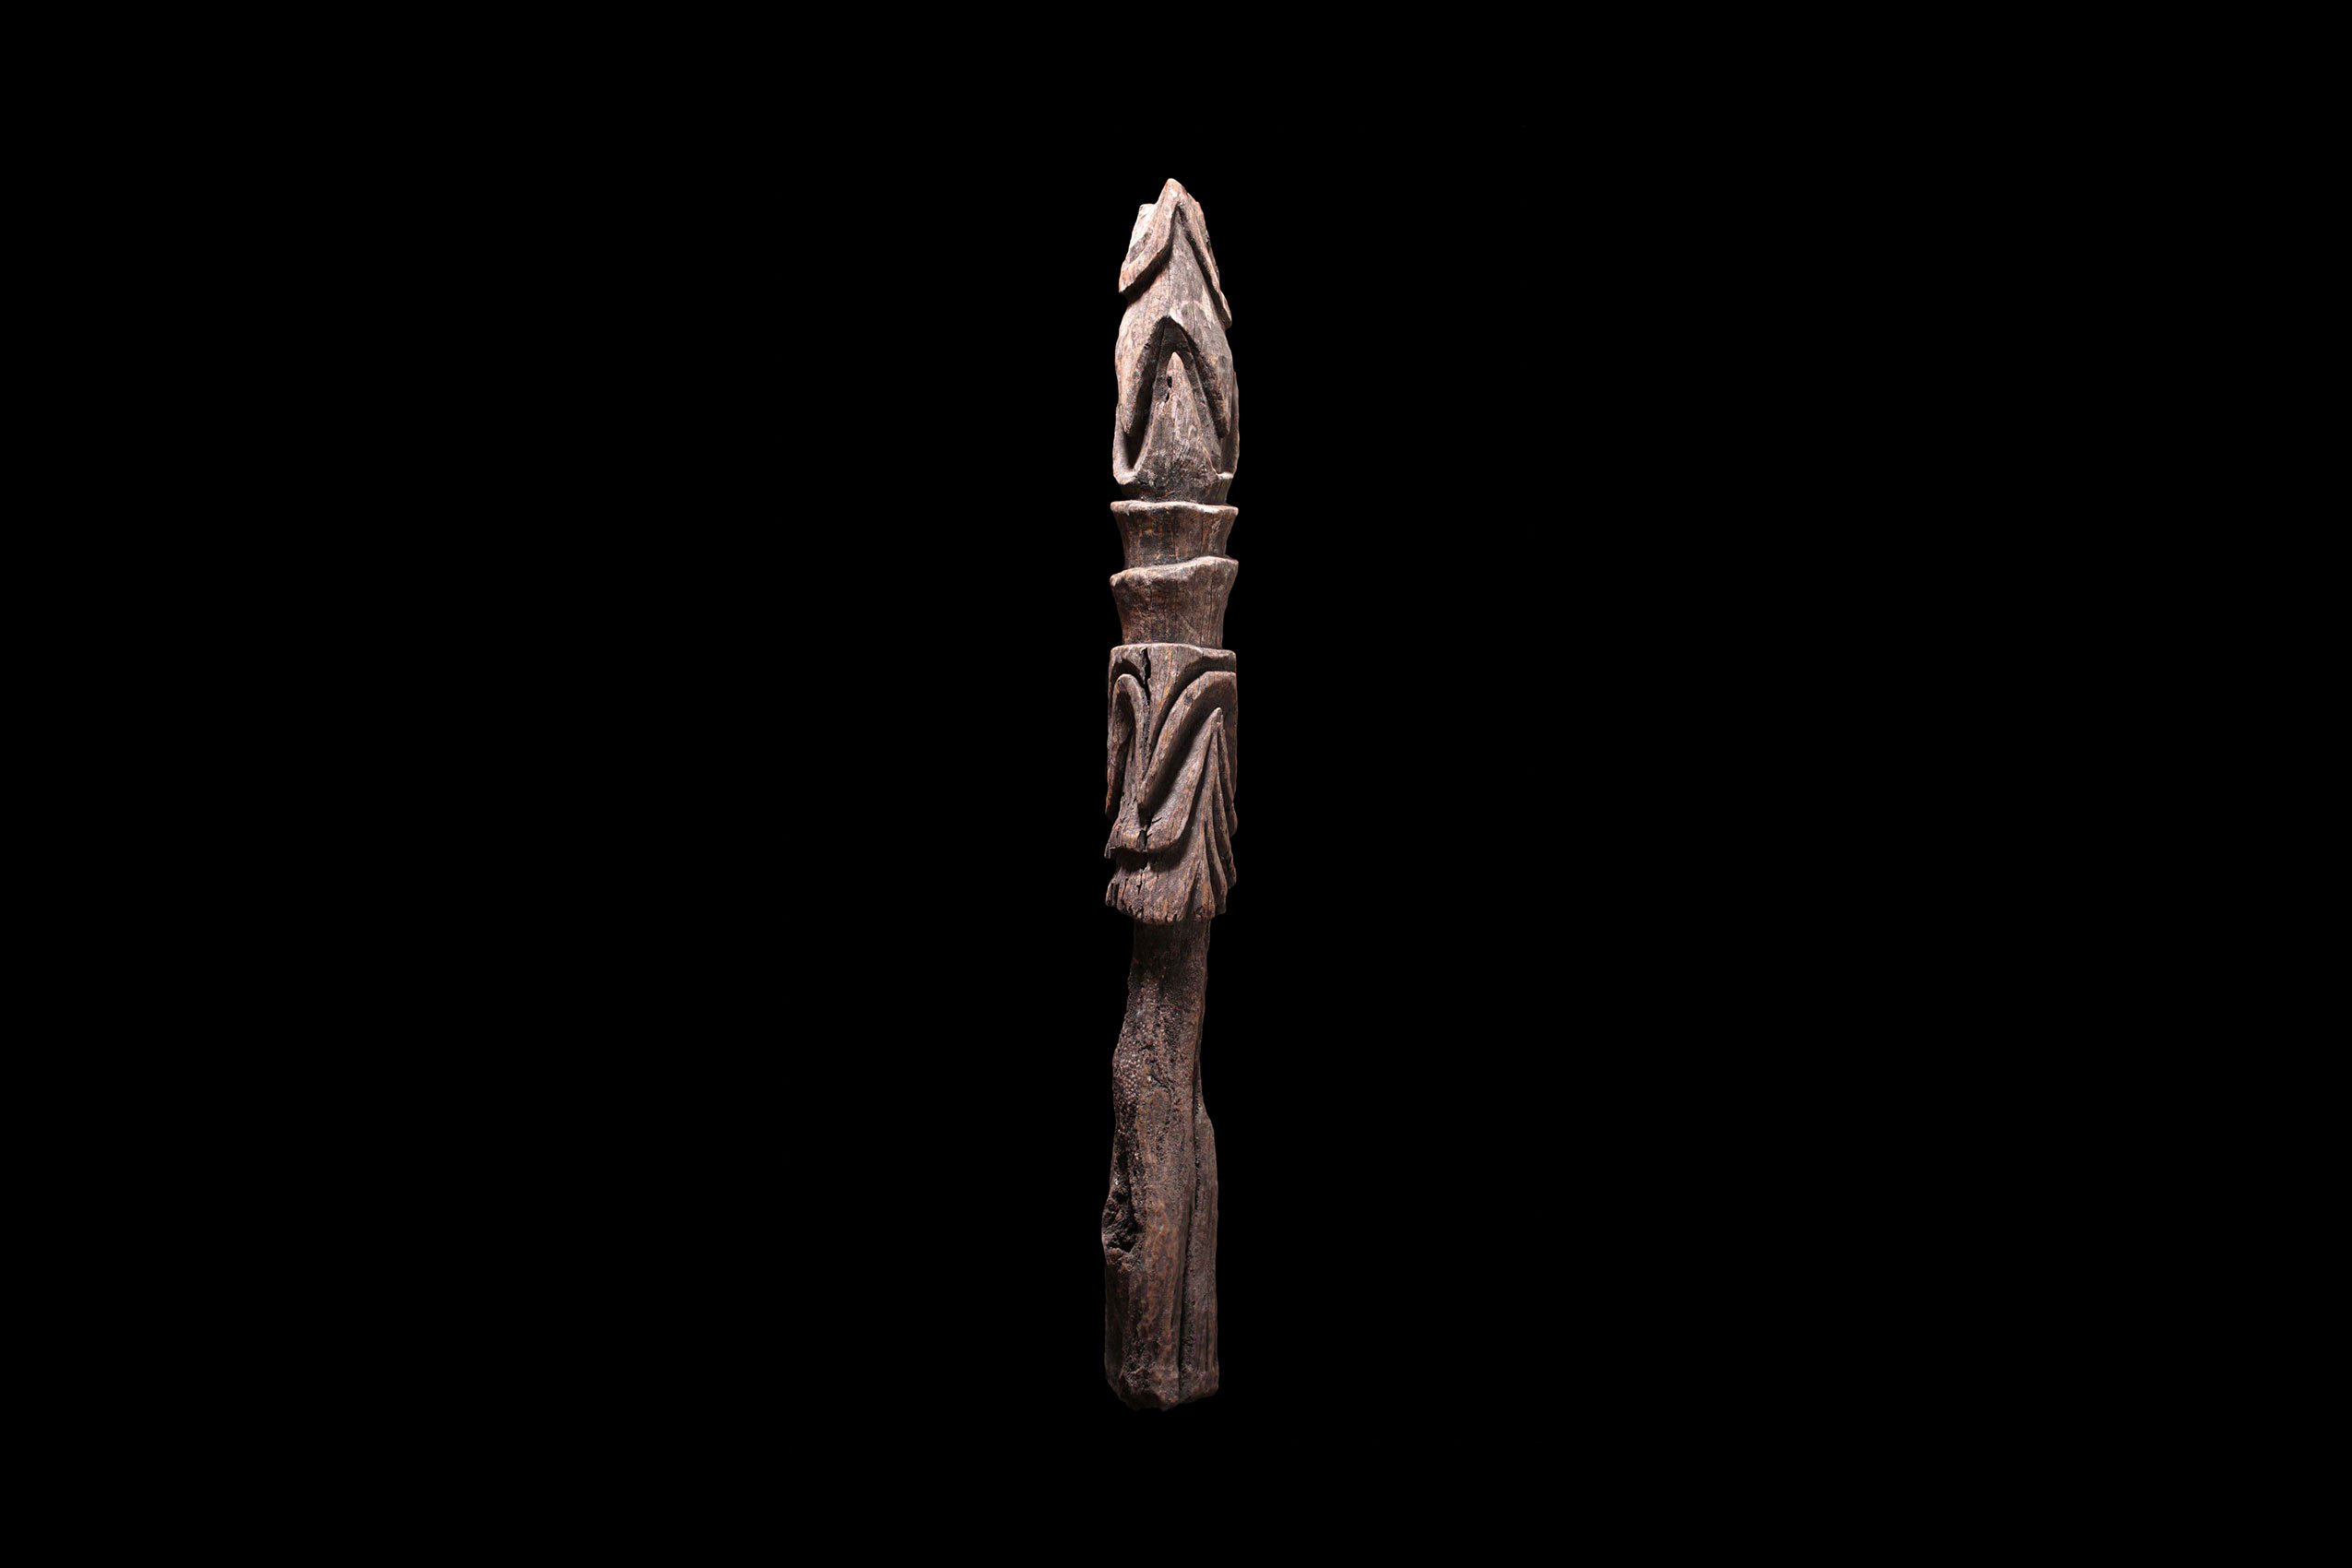 One of three known Massim or Collingwood Bay Ceremonial House Post, a Rare Top-quality piece of Oceanic Art